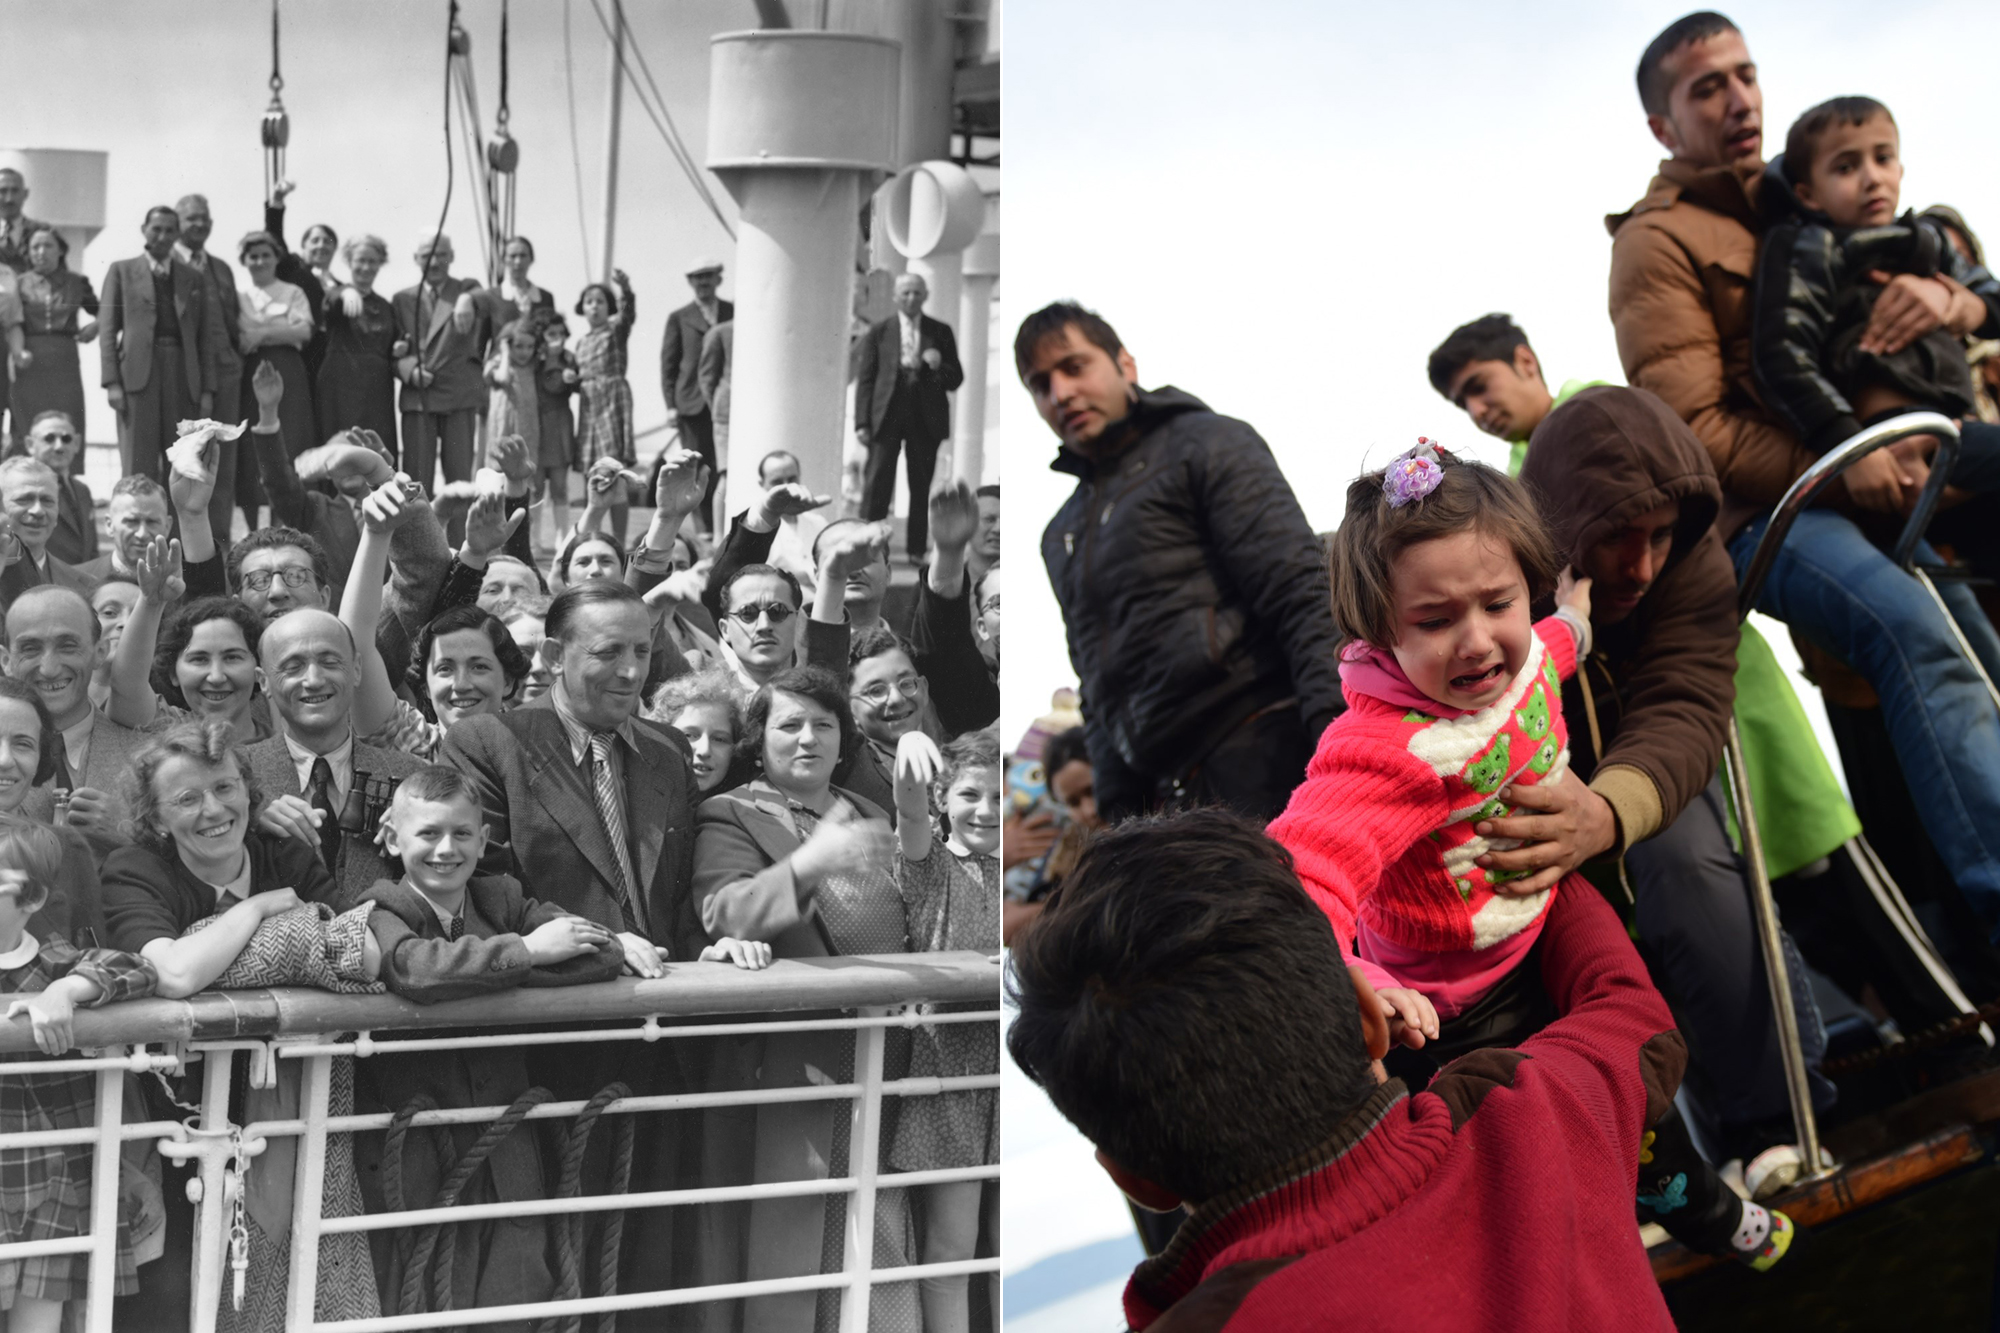 From left: Some of the 700 Jewish refugees aboard the Hamburg-America liner St. Louis on arrival at Antwerp, Belgium on June 17, 1939. A child is lifted off, as migrants and refugees disembark on the Greek island of Lesbos on Nov. 16, 2015. (Keystone—Getty Images; Bulent—AFP/Getty Images)